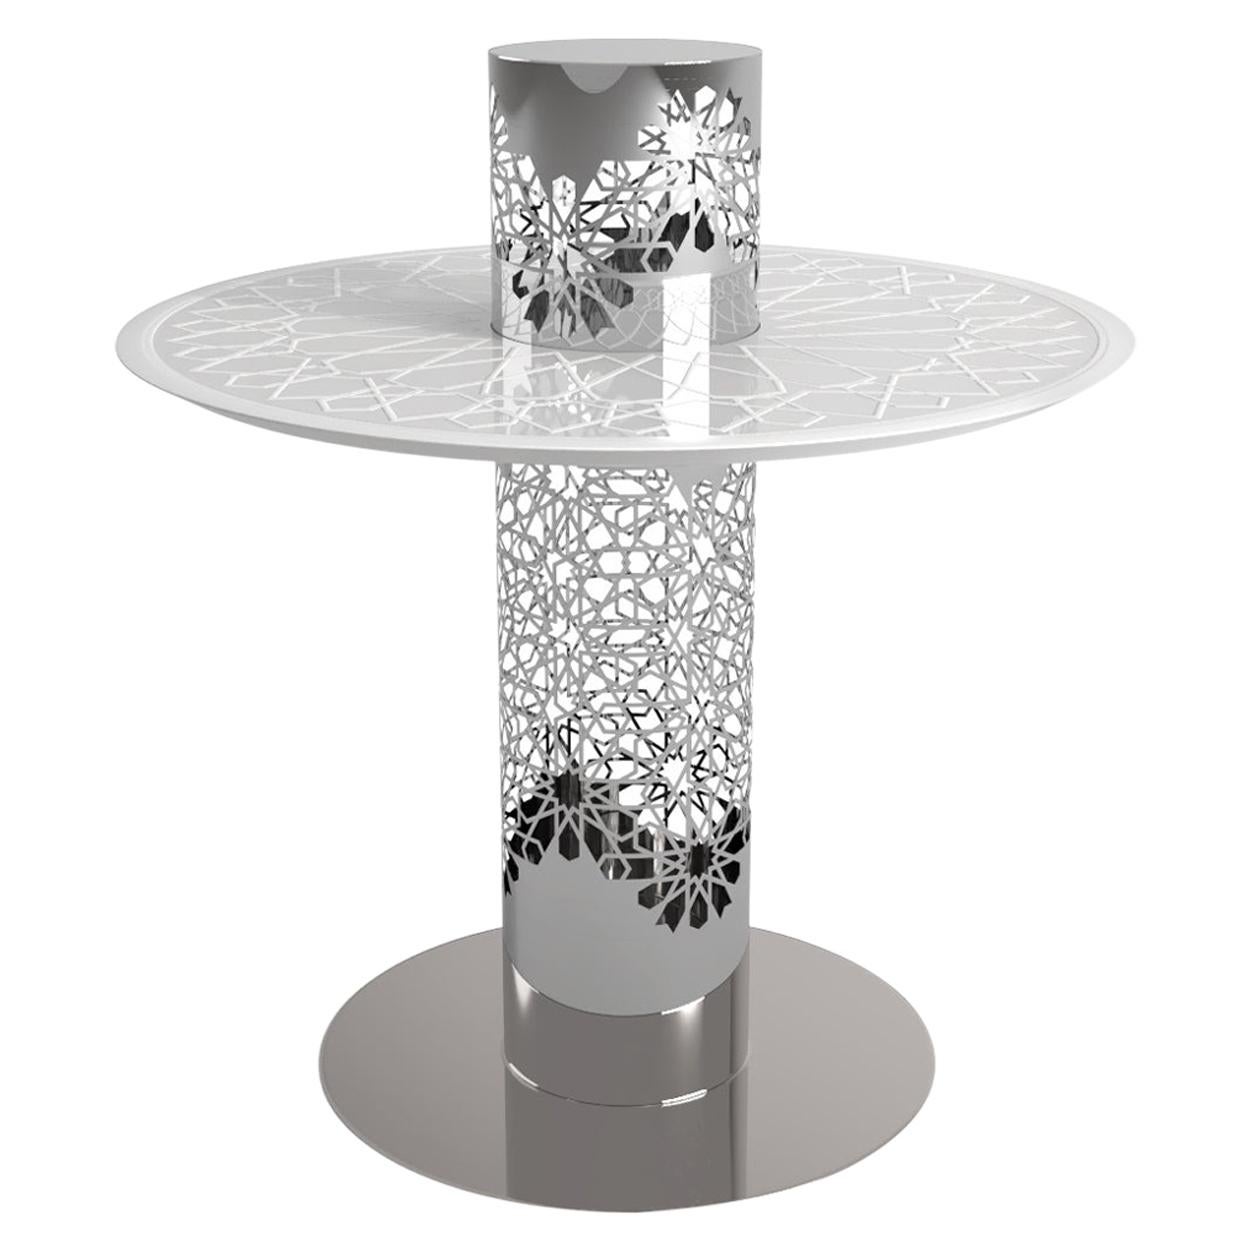 Arabesque White Frosted Glass Tea Table, Designed by João Faria